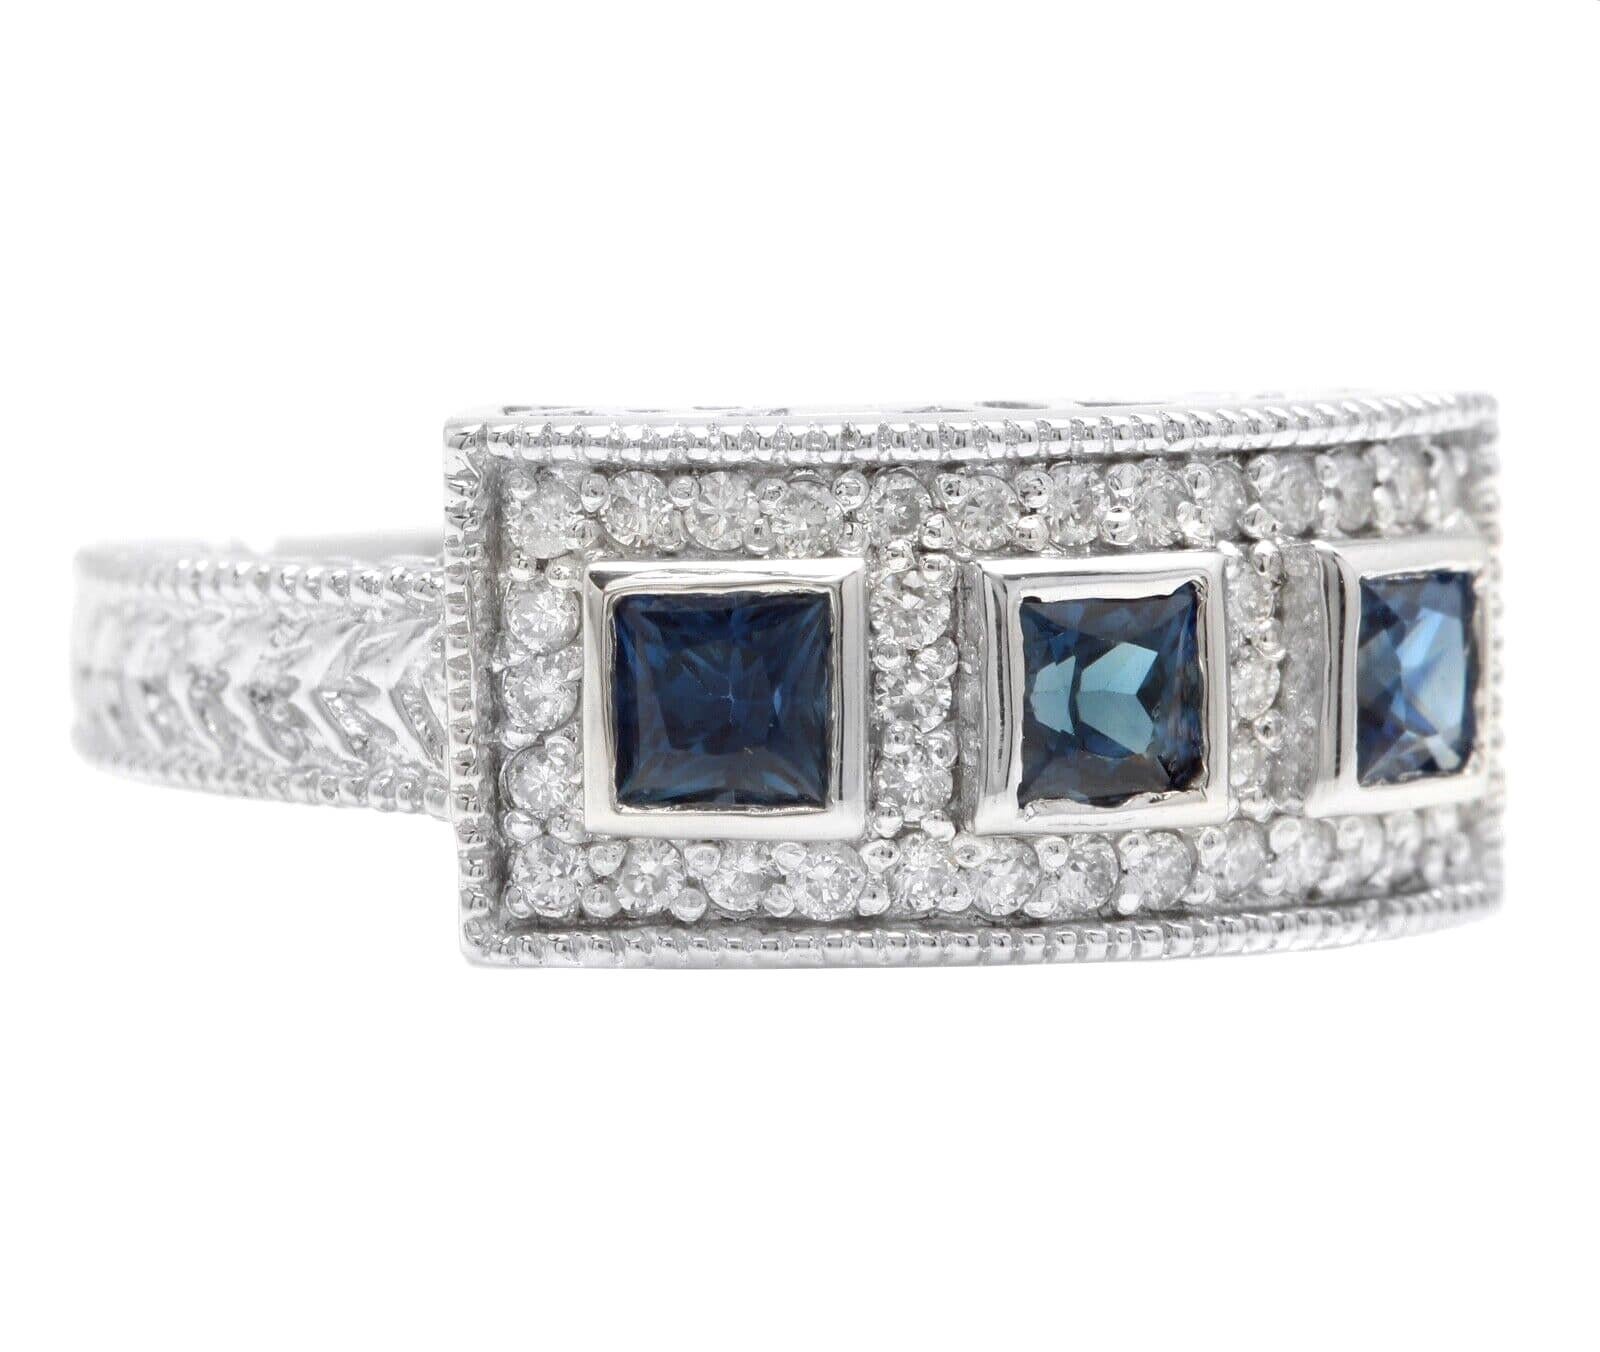 1.20Ct Natural Blue Sapphire and Diamond 14K Solid White Gold Ring

Suggested Replacement Value $4,000.00

Total Natural Blue Sapphires Weight: Approx. 0.85 Carats 

Diamond Weight is Approx. 0.35Ct (Color G-H / Clarity SI)

Width of the ring is: